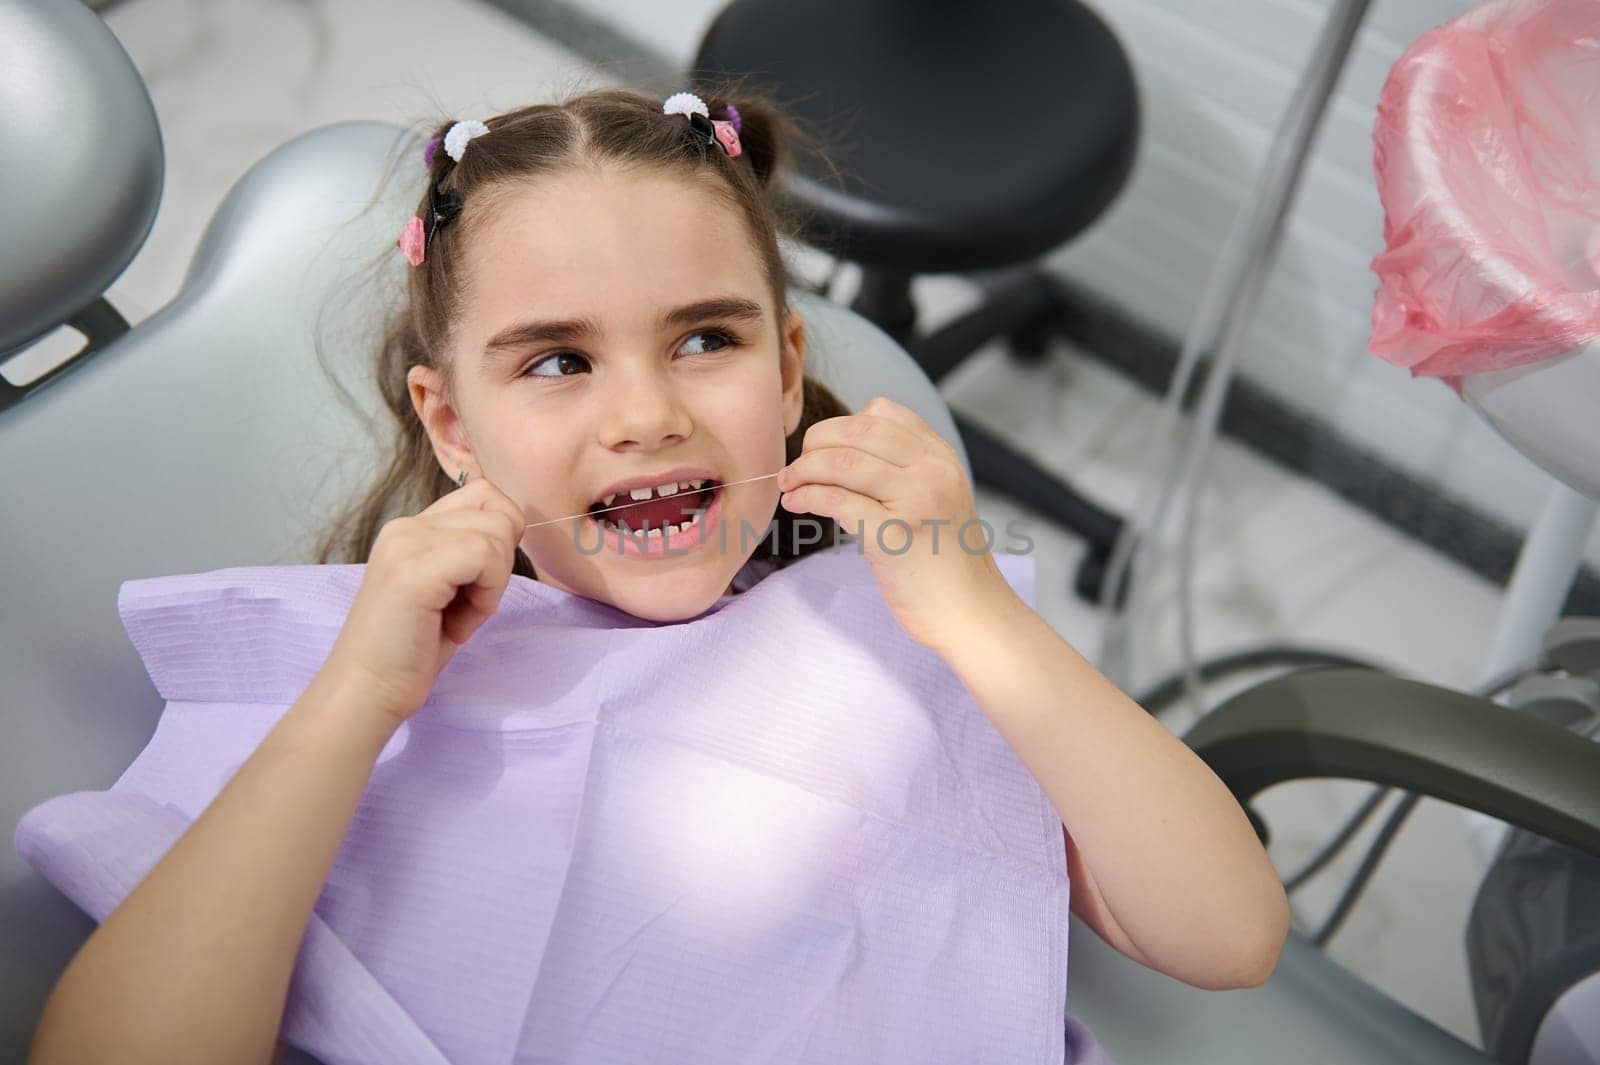 Smiling child girl, a patient in pediatric dentistry clinic, cleaning her teeth with a dental floss. Oral care and hygiene for prevention caries of baby teeth. Dental practice. Healthcare and medicine